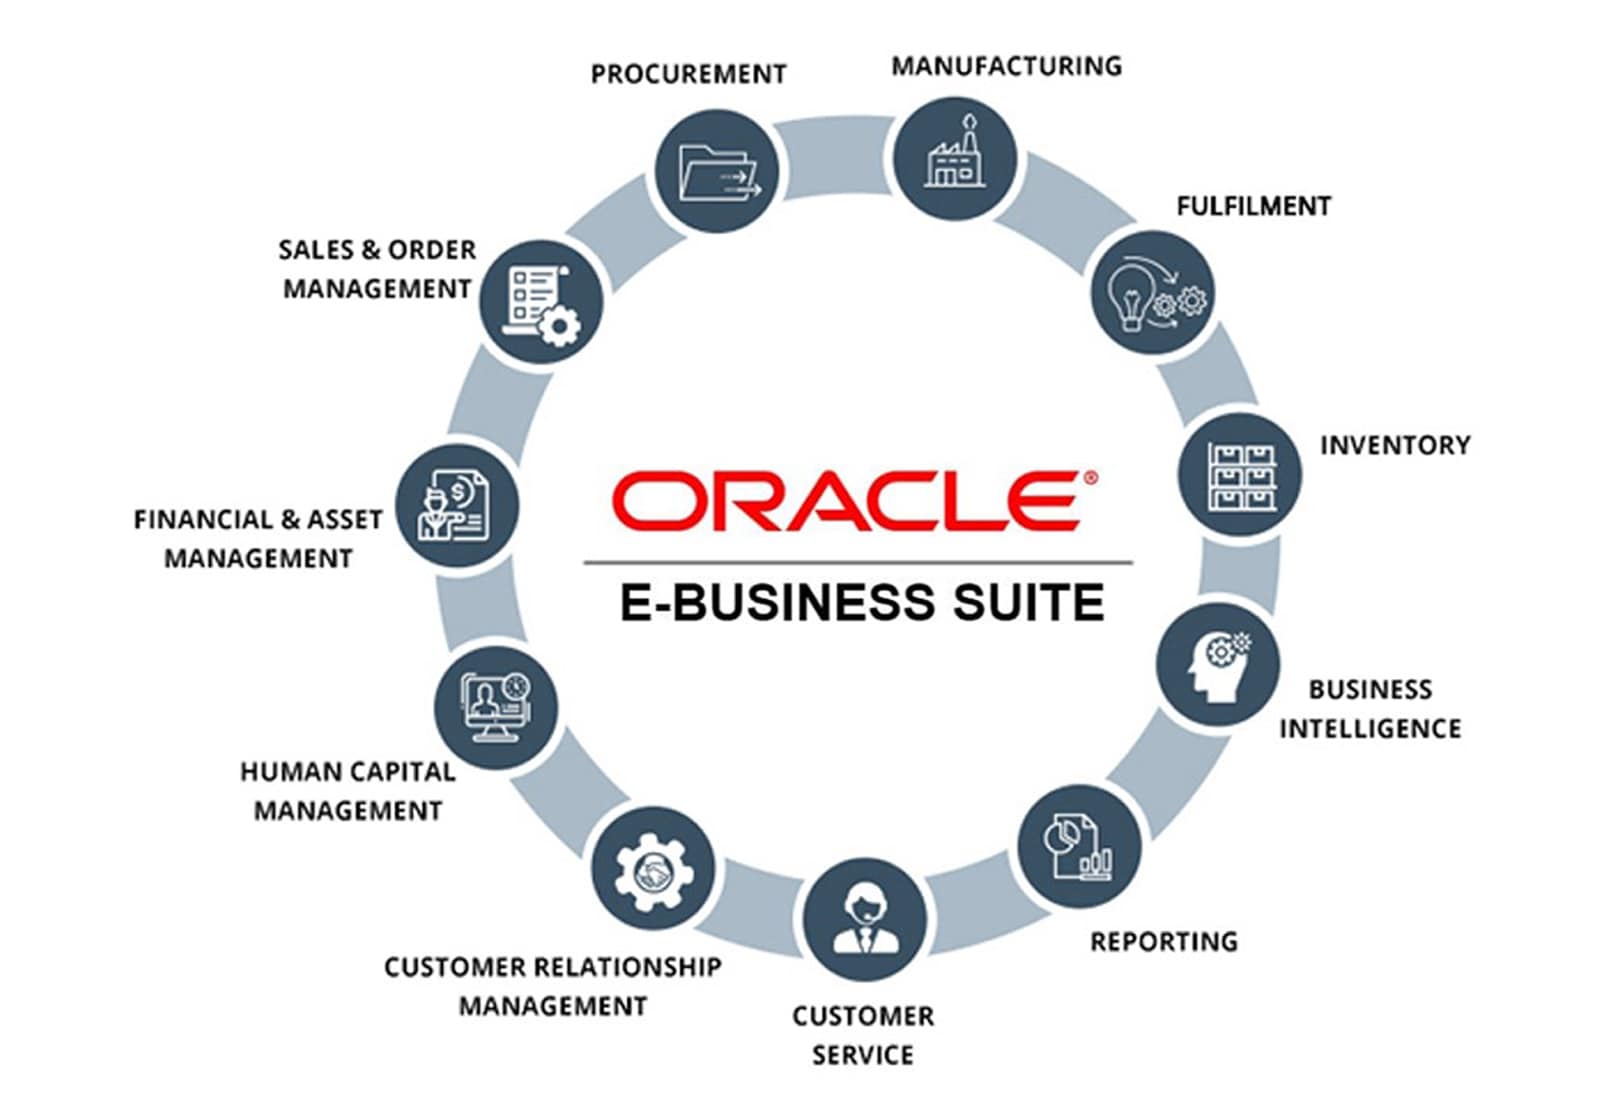 Our Oracle E-Business Suite Capabilities